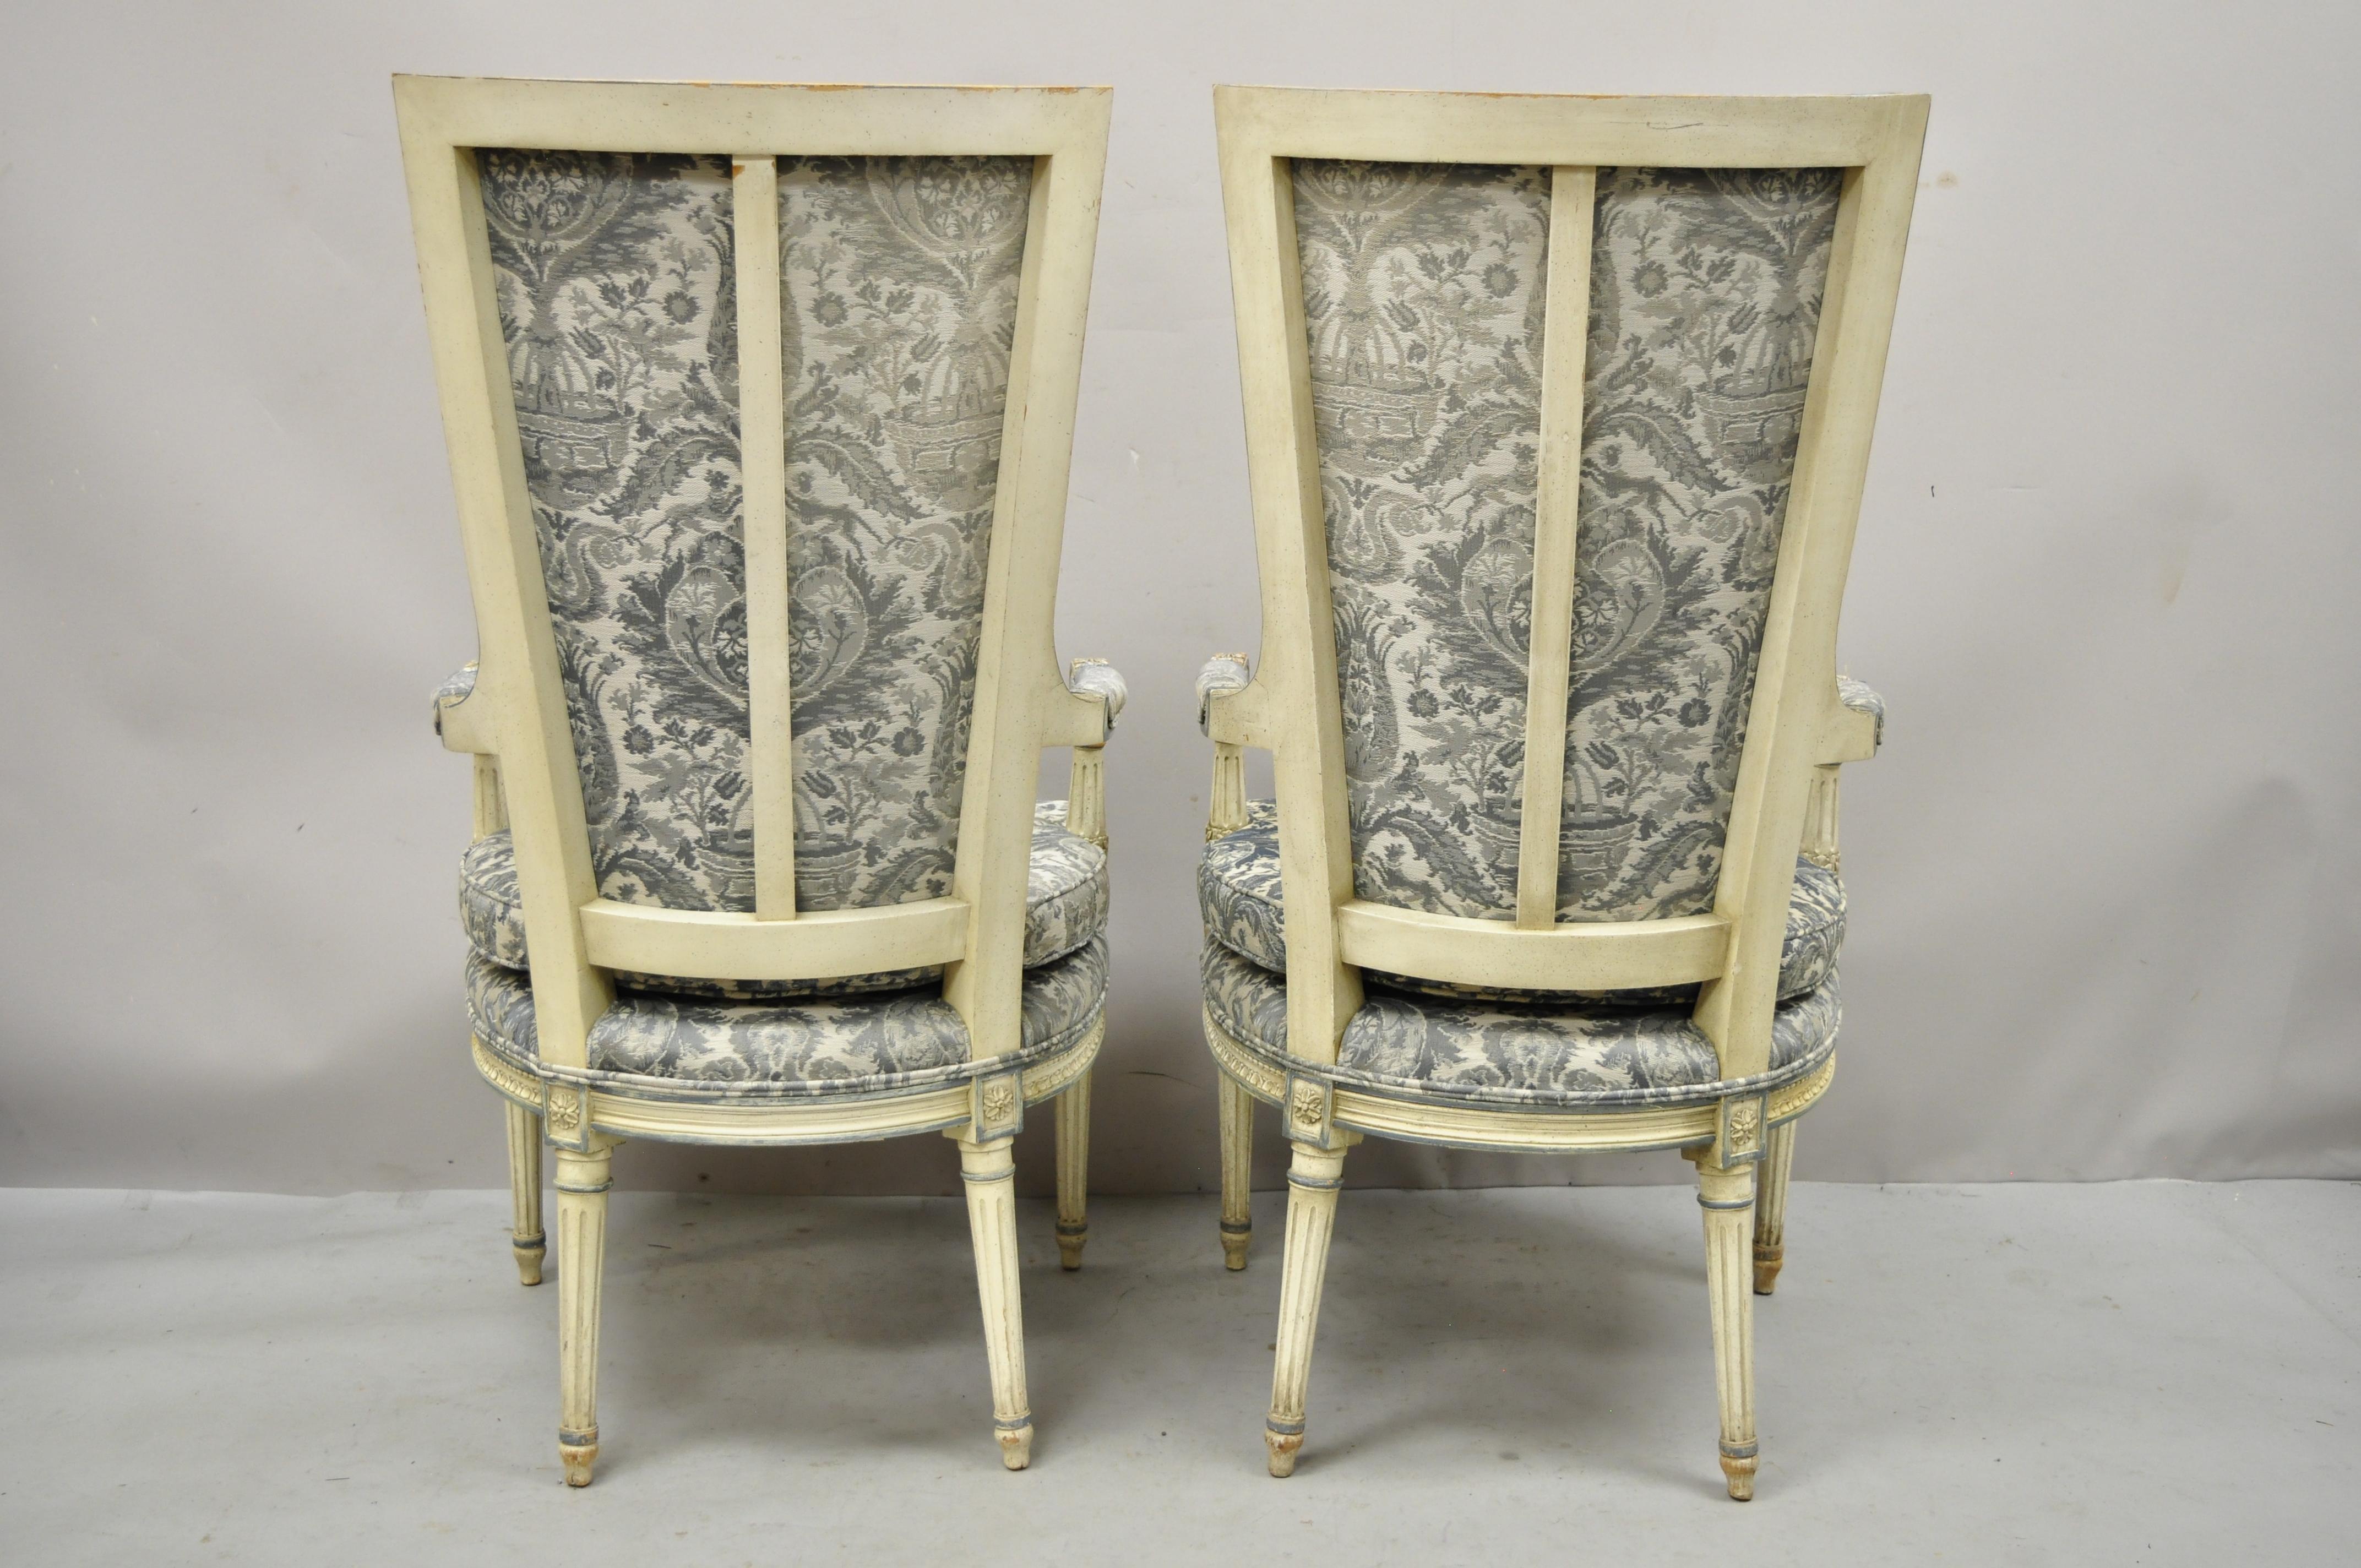 Fabric Vintage French Louis XVI Provincial Blue Cream High Back Lounge Chairs, a Pair For Sale